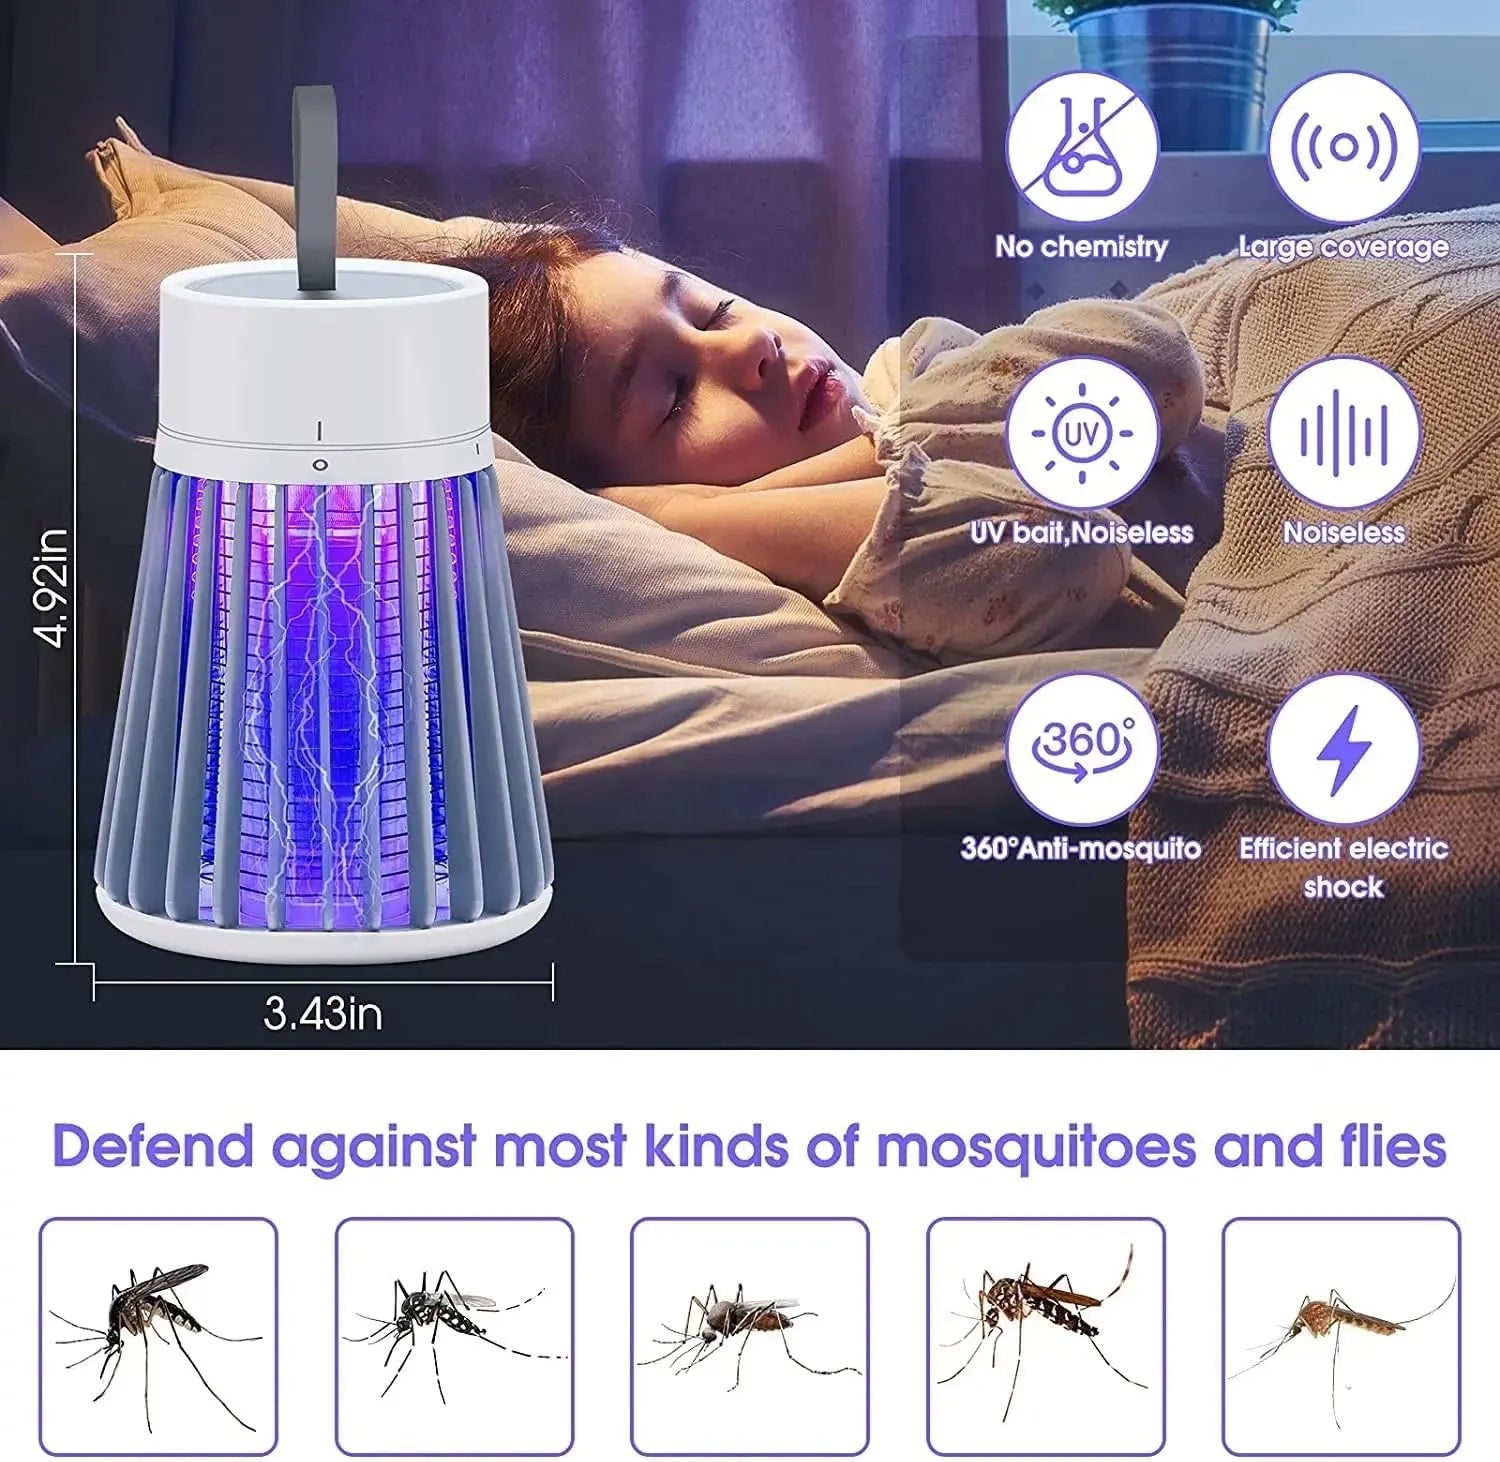 Advanced UV Technology - Close-up of the bug zapper's powerful light for efficient insect elimination